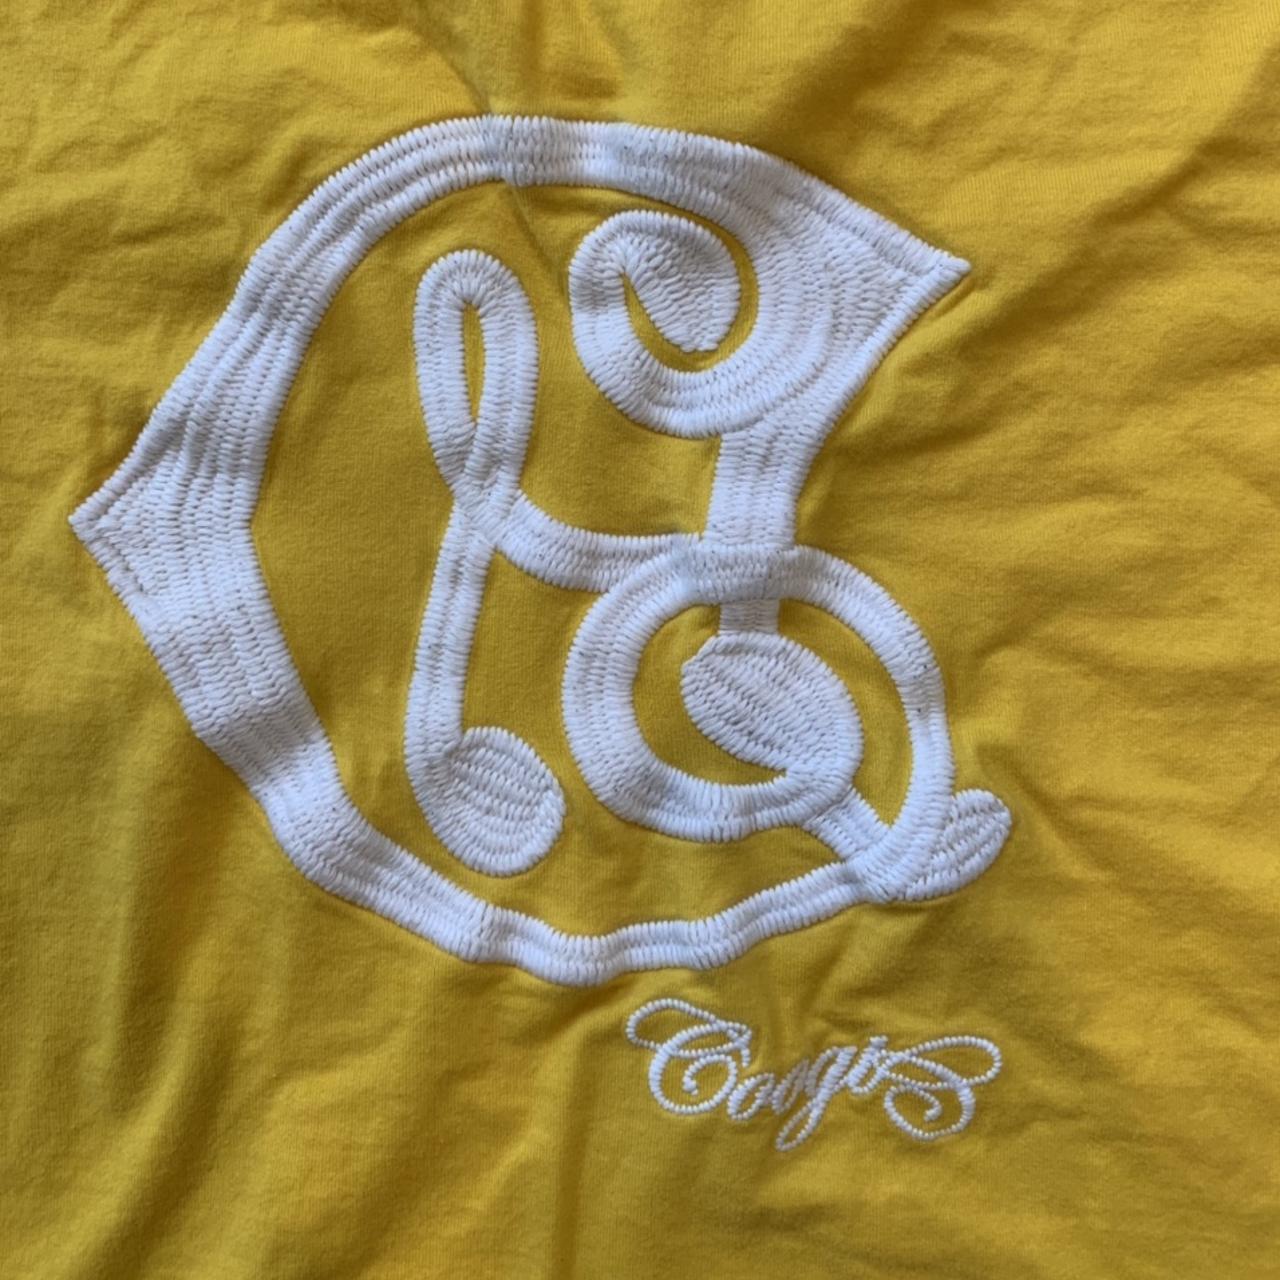 Yellow Coogi embroidered premium collection t-shirt - Depop